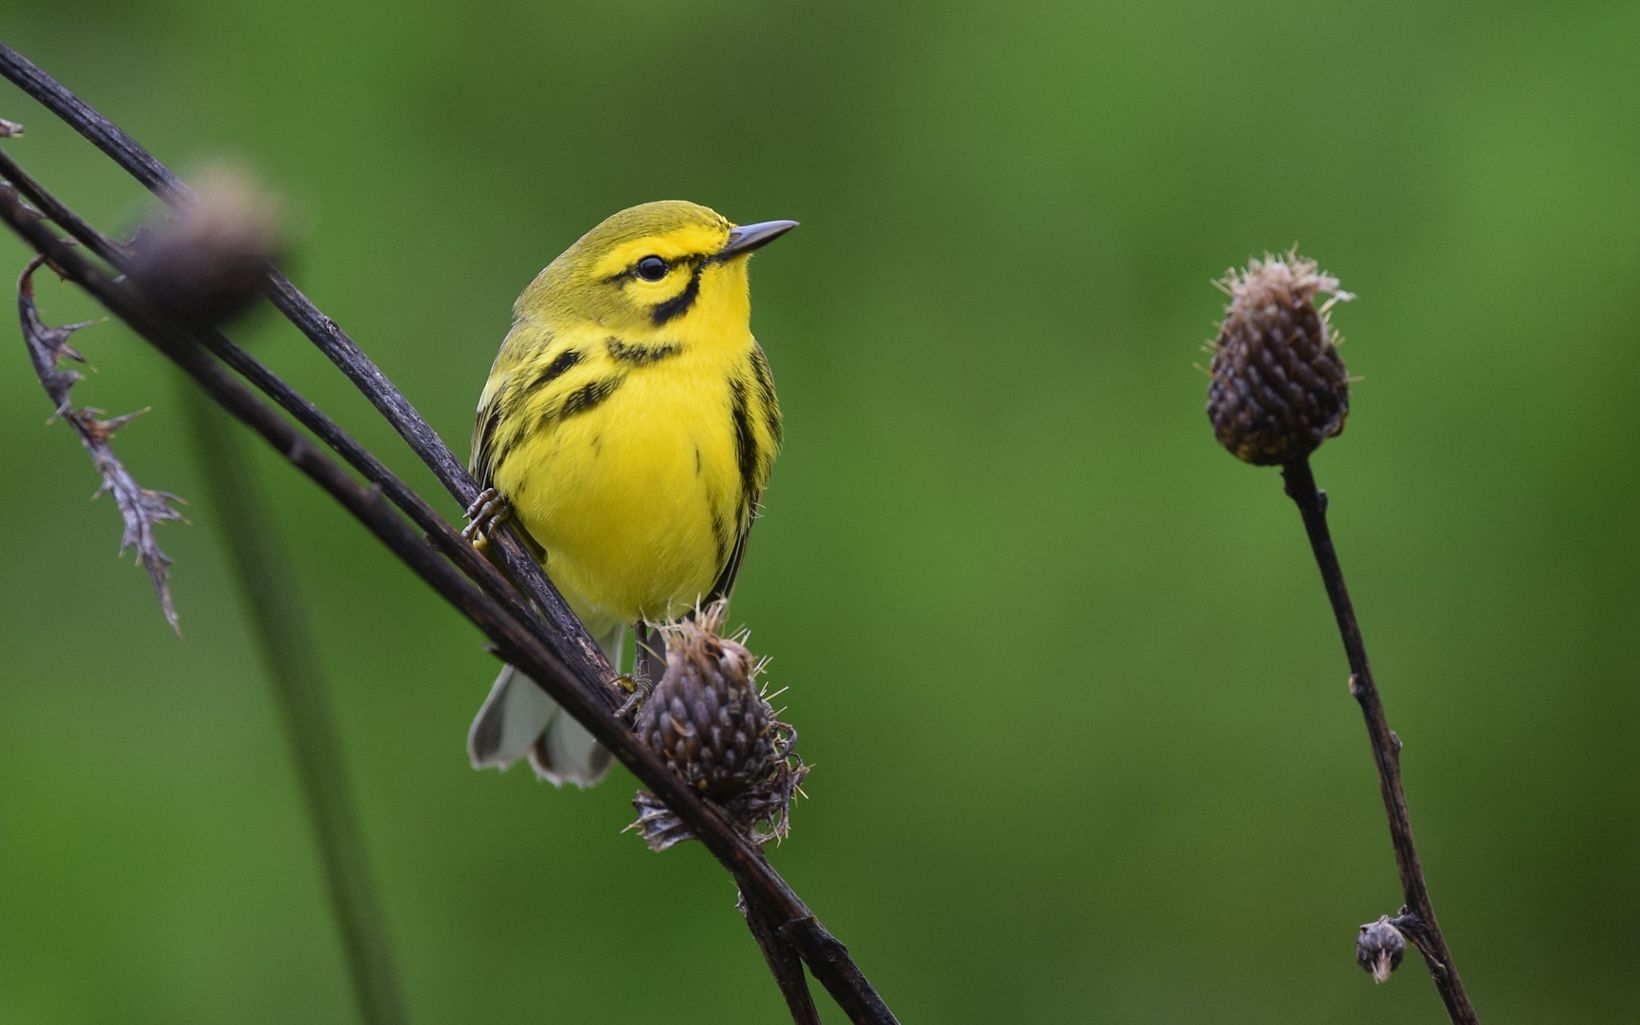 A yellow and black bird rests on a dry stem.